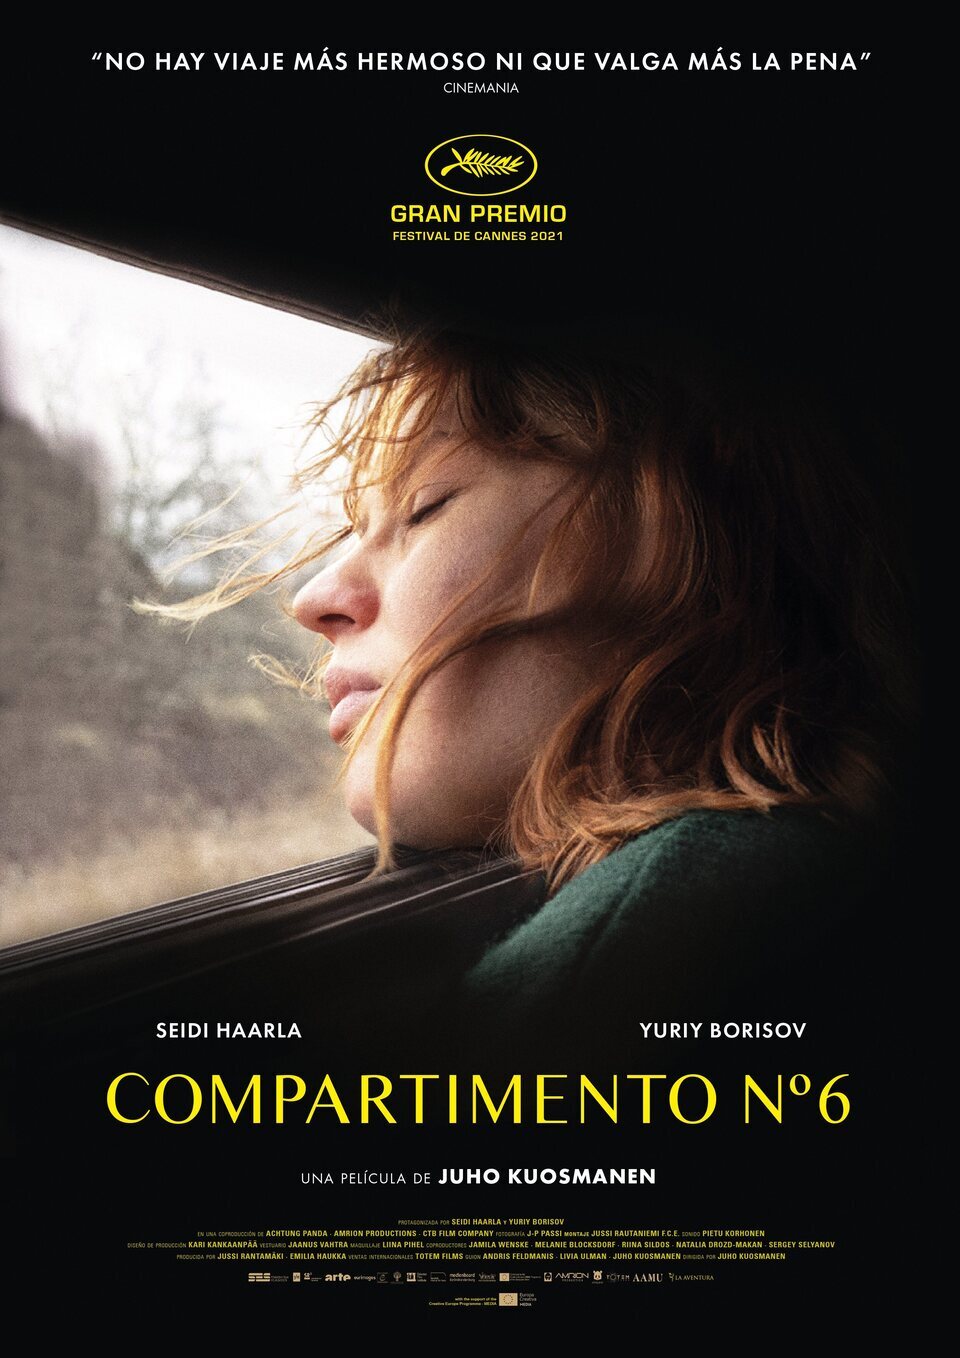 Poster of Compartment Number 6 - Compartinmento nº6